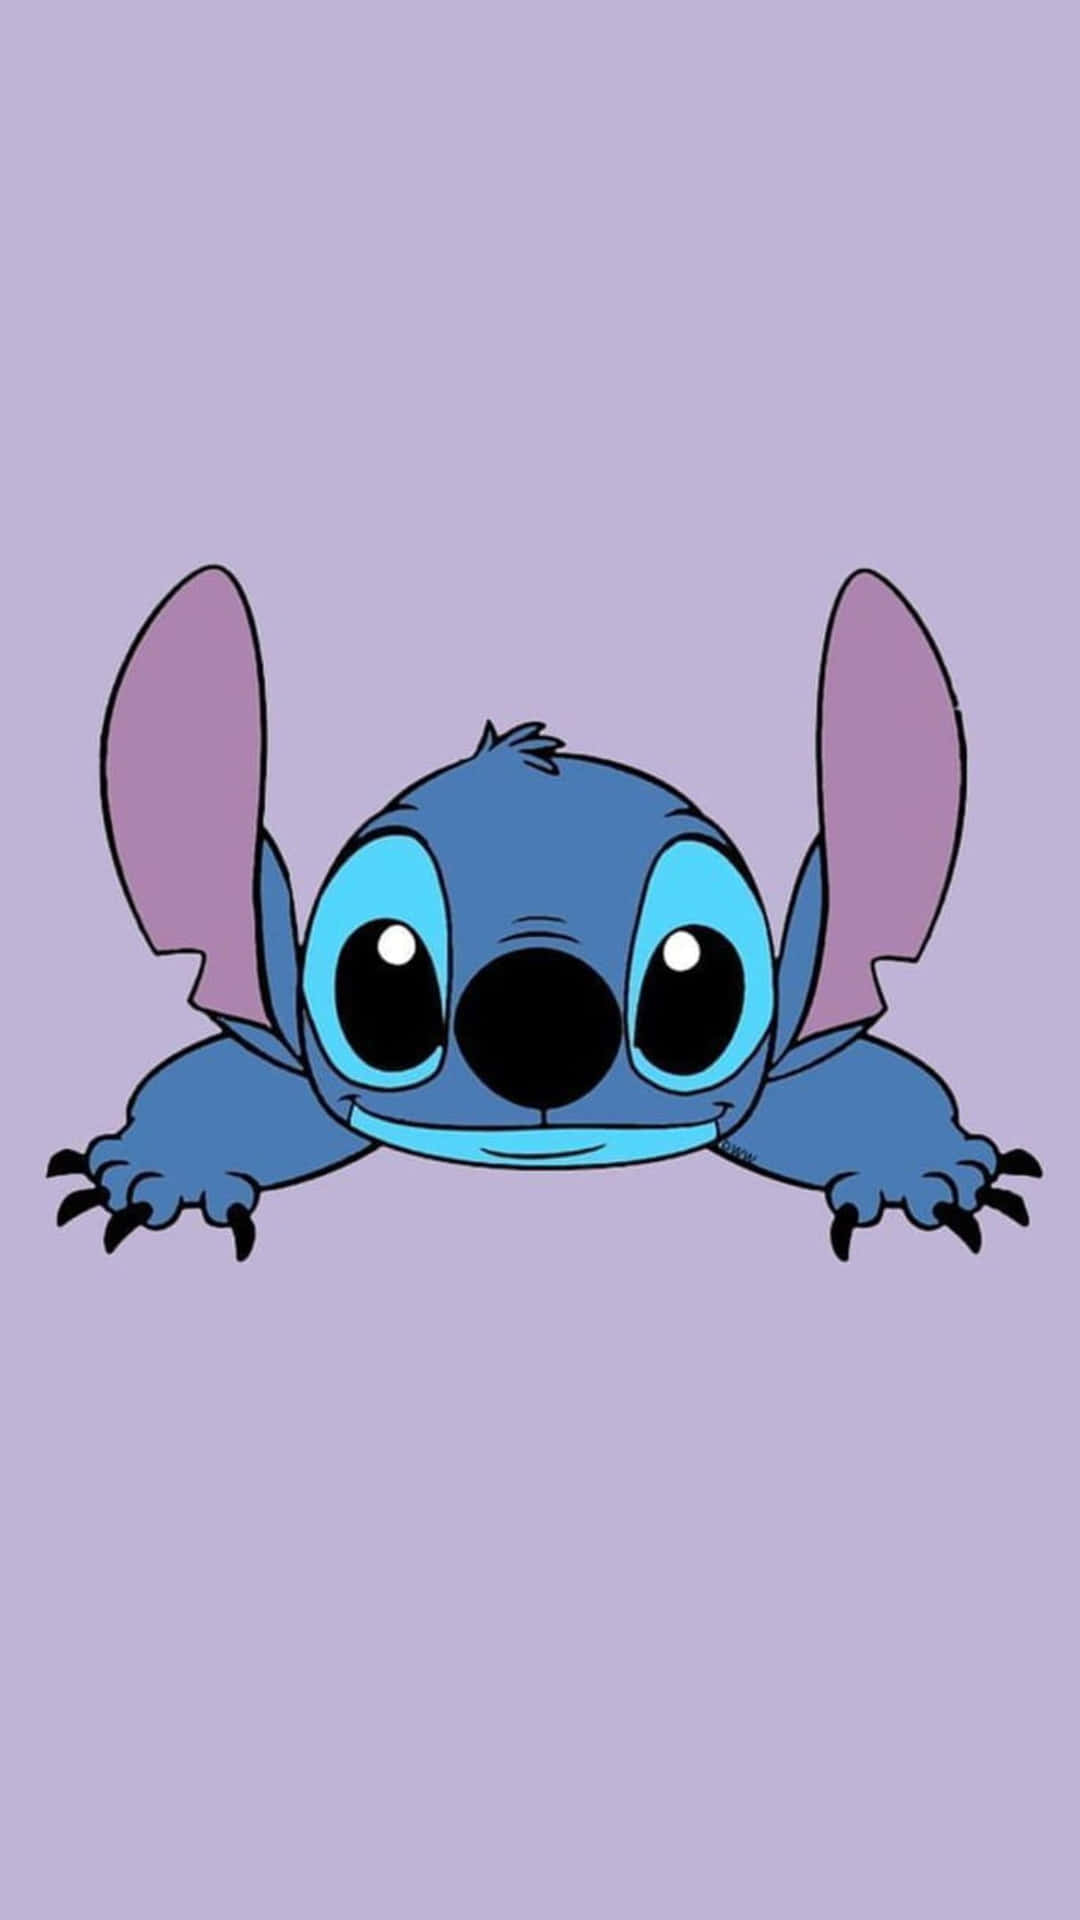 Download An Adorable Moment Of Lilo And Stitch In Paradise | Wallpapers.com